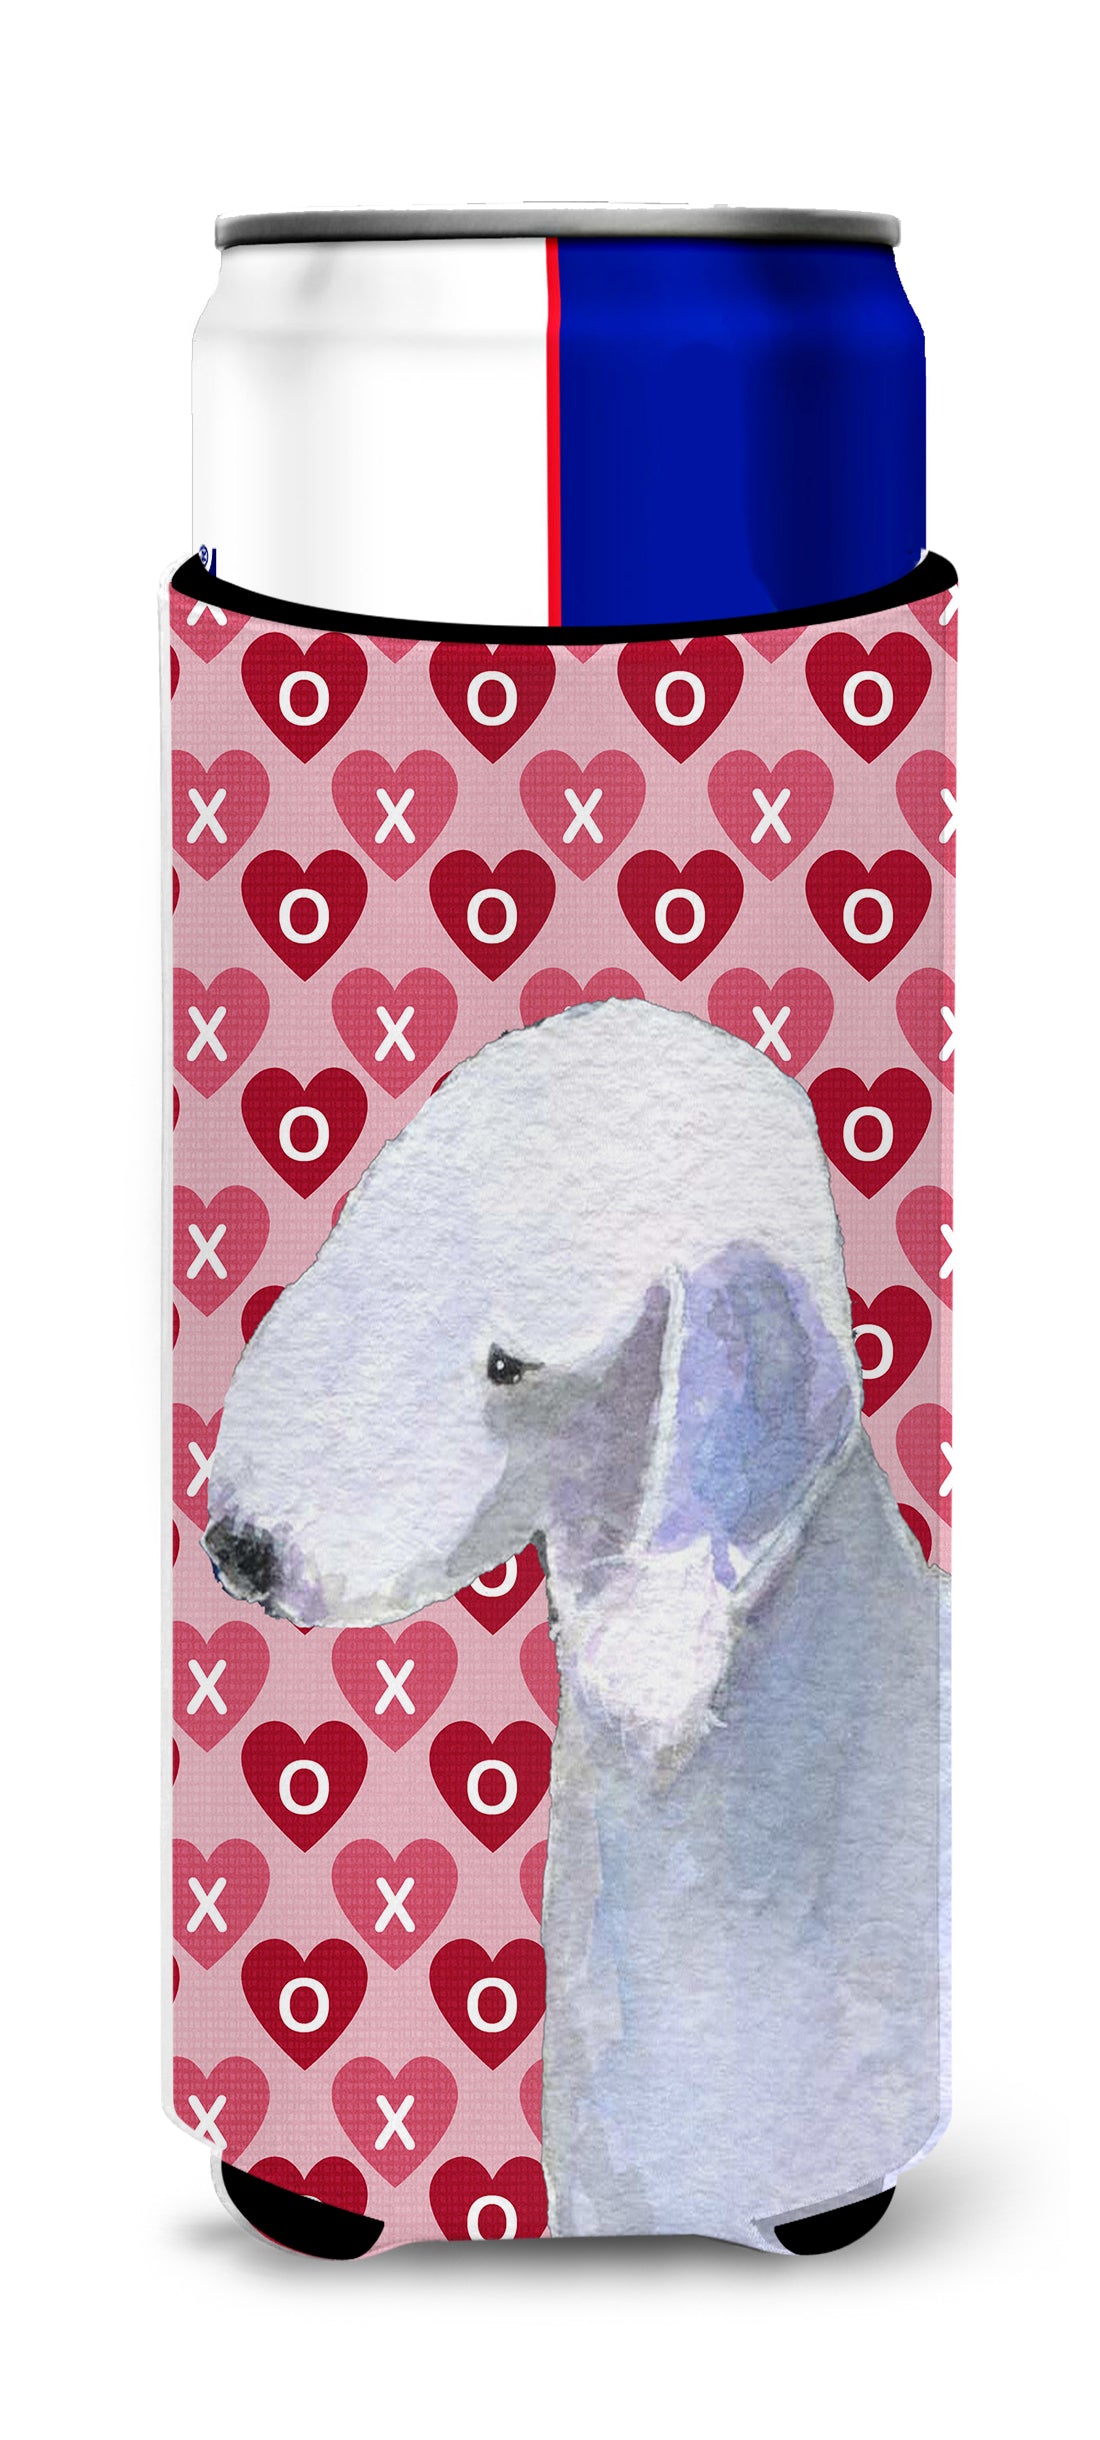 Bedlington Terrier Hearts Love and Valentine's Day Portrait Ultra Beverage Insulators for slim cans SS4483MUK.